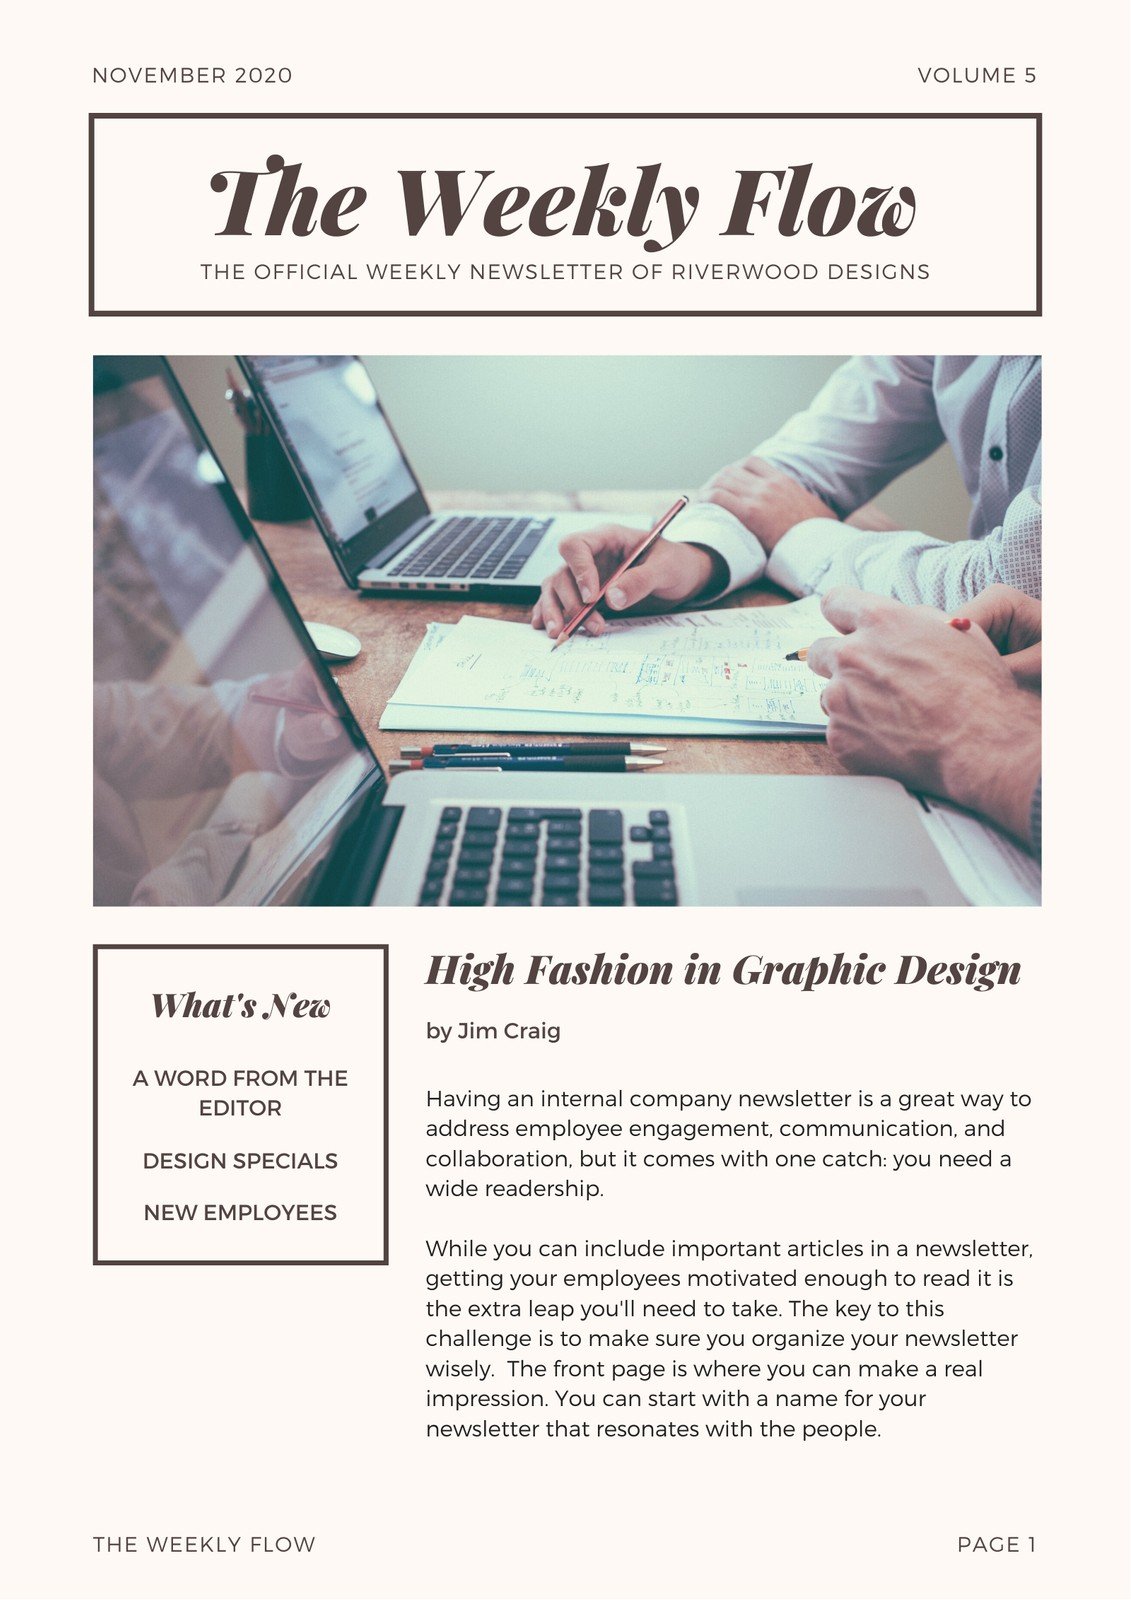 Customize 52 Company Newsletters Templates Online Canva